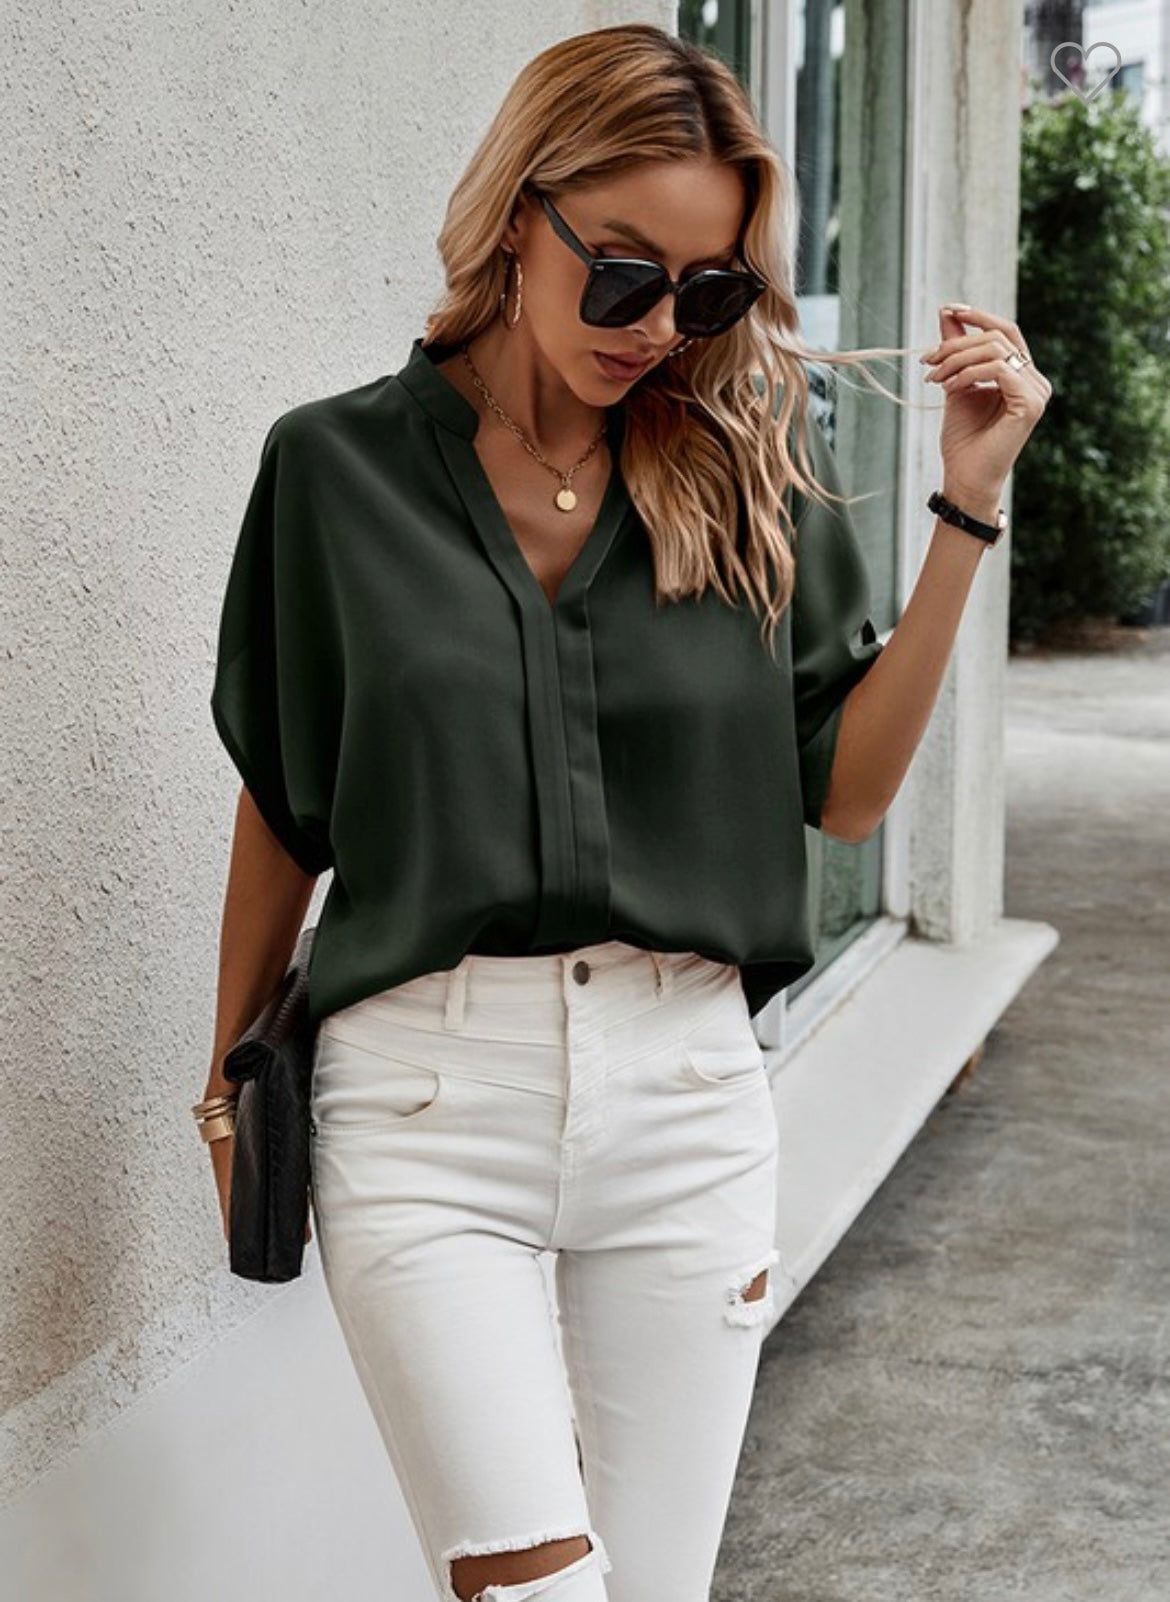 Classy Olive Top